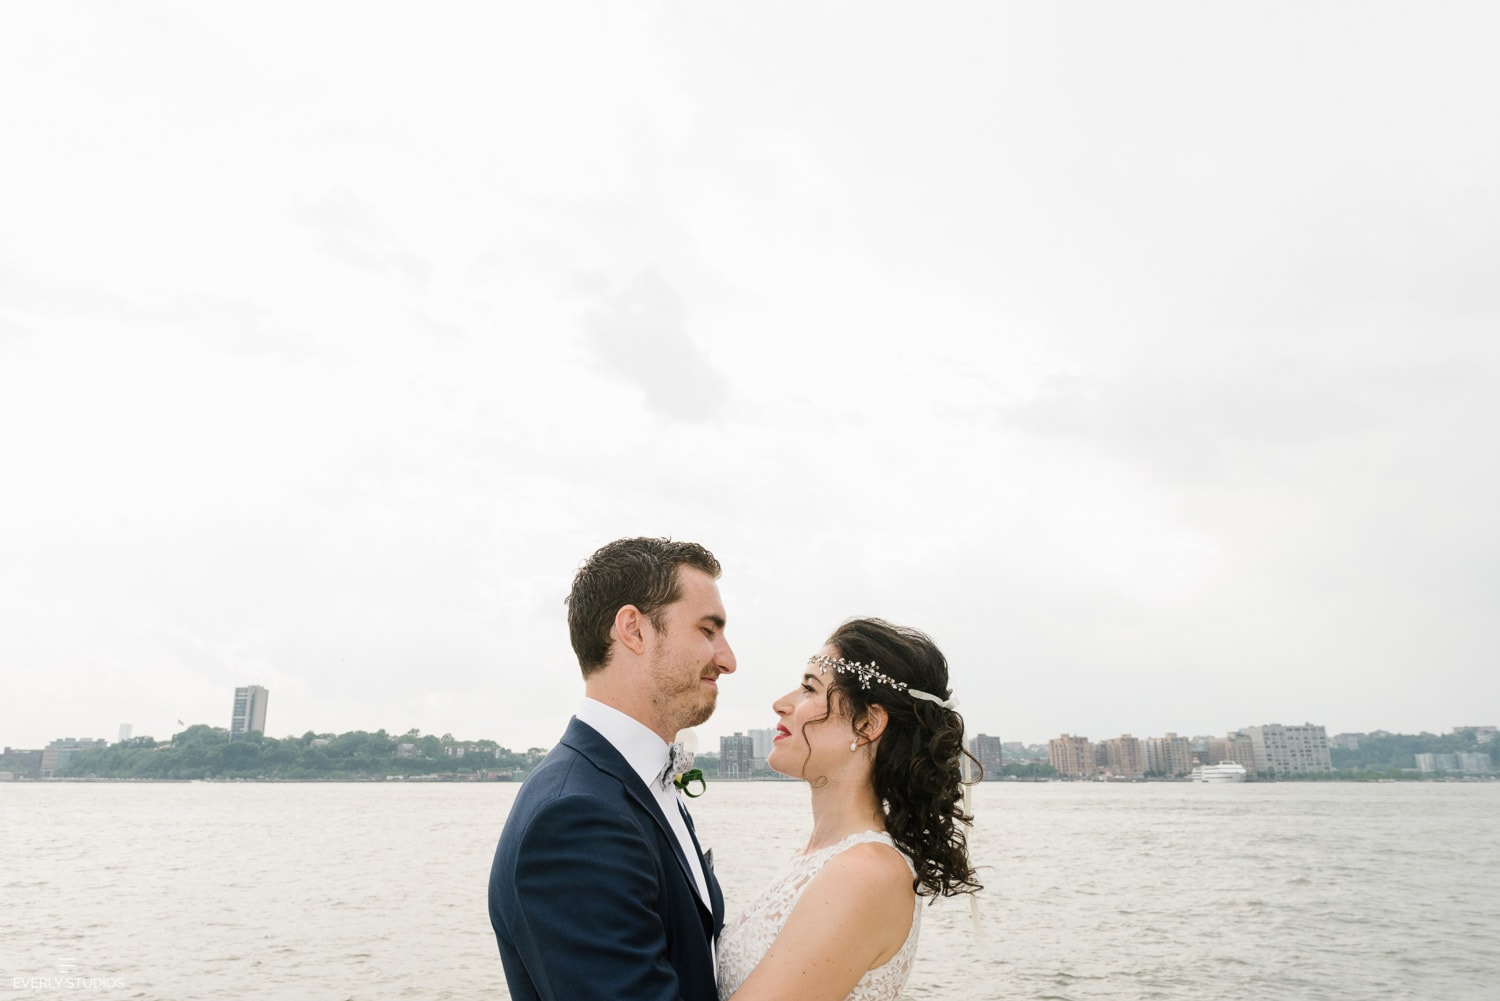 Bride and groom at Chelsea Piers Sunset Terrace wedding on the Hudson River in NYC